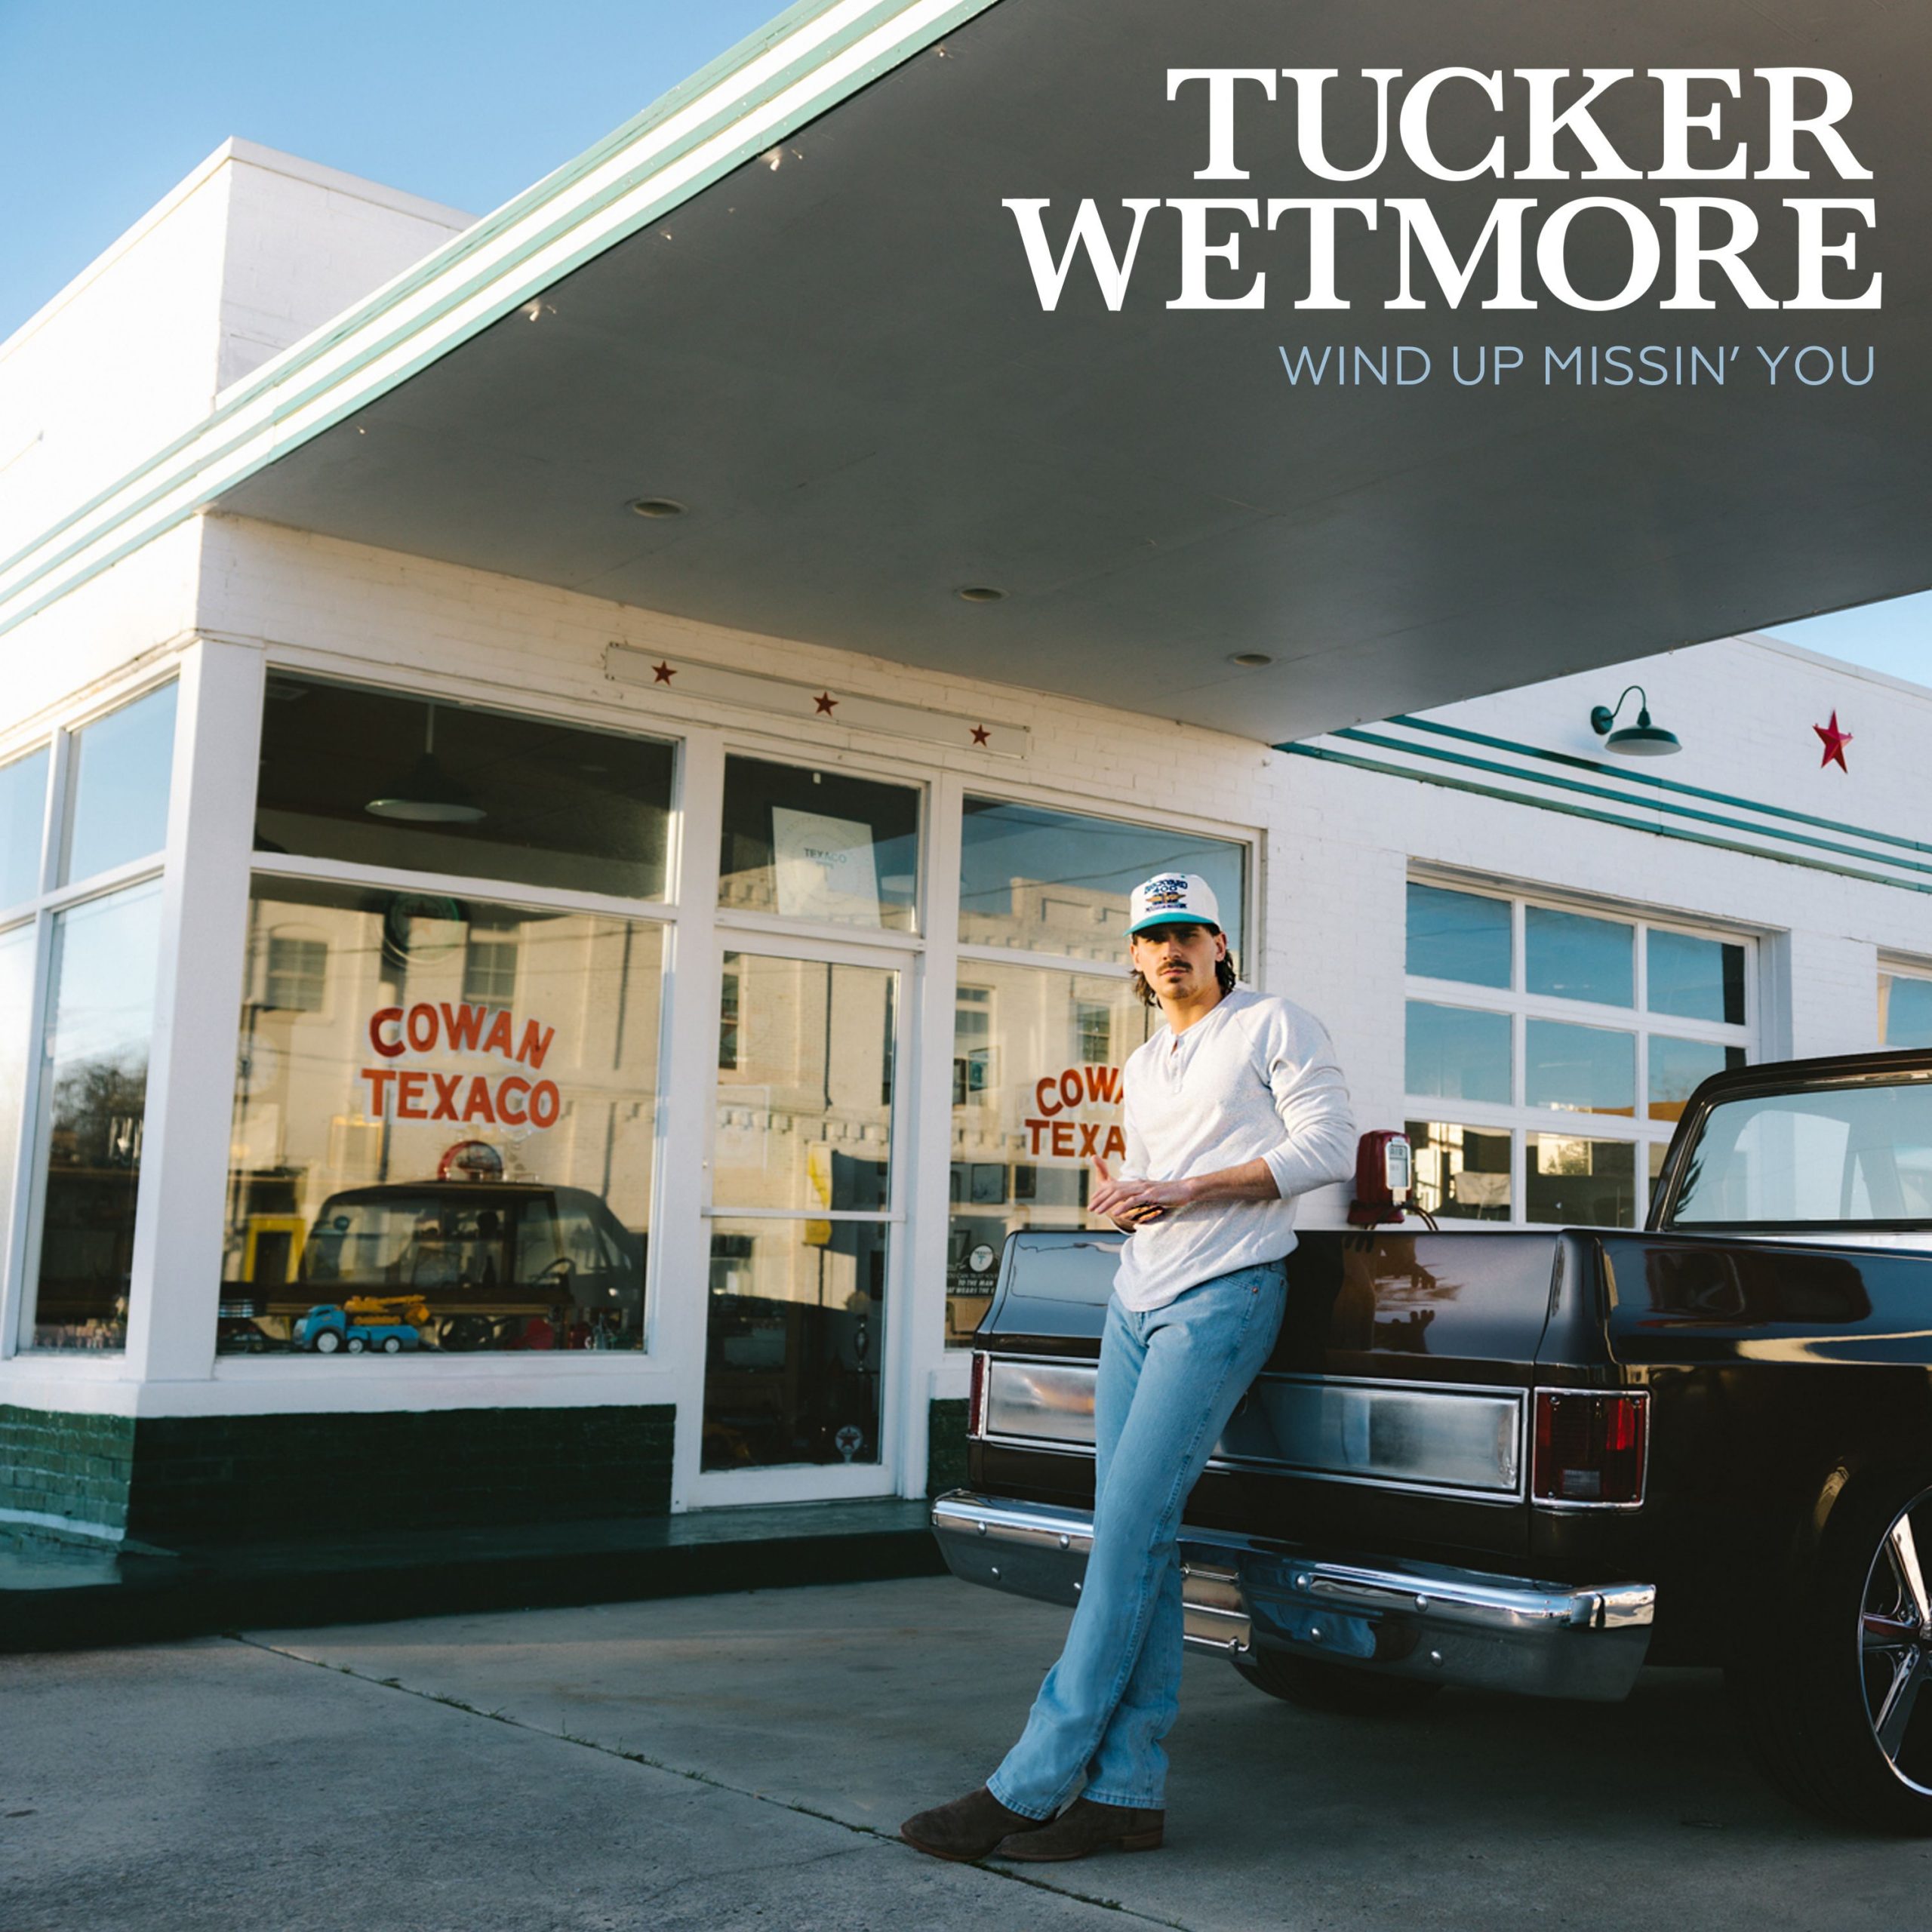 TUCKER WETMORE “WINDS UP” WITH 64 FIRST-WEEK STATIONS AS HE DEBUTS AT COUNTRY RADIO